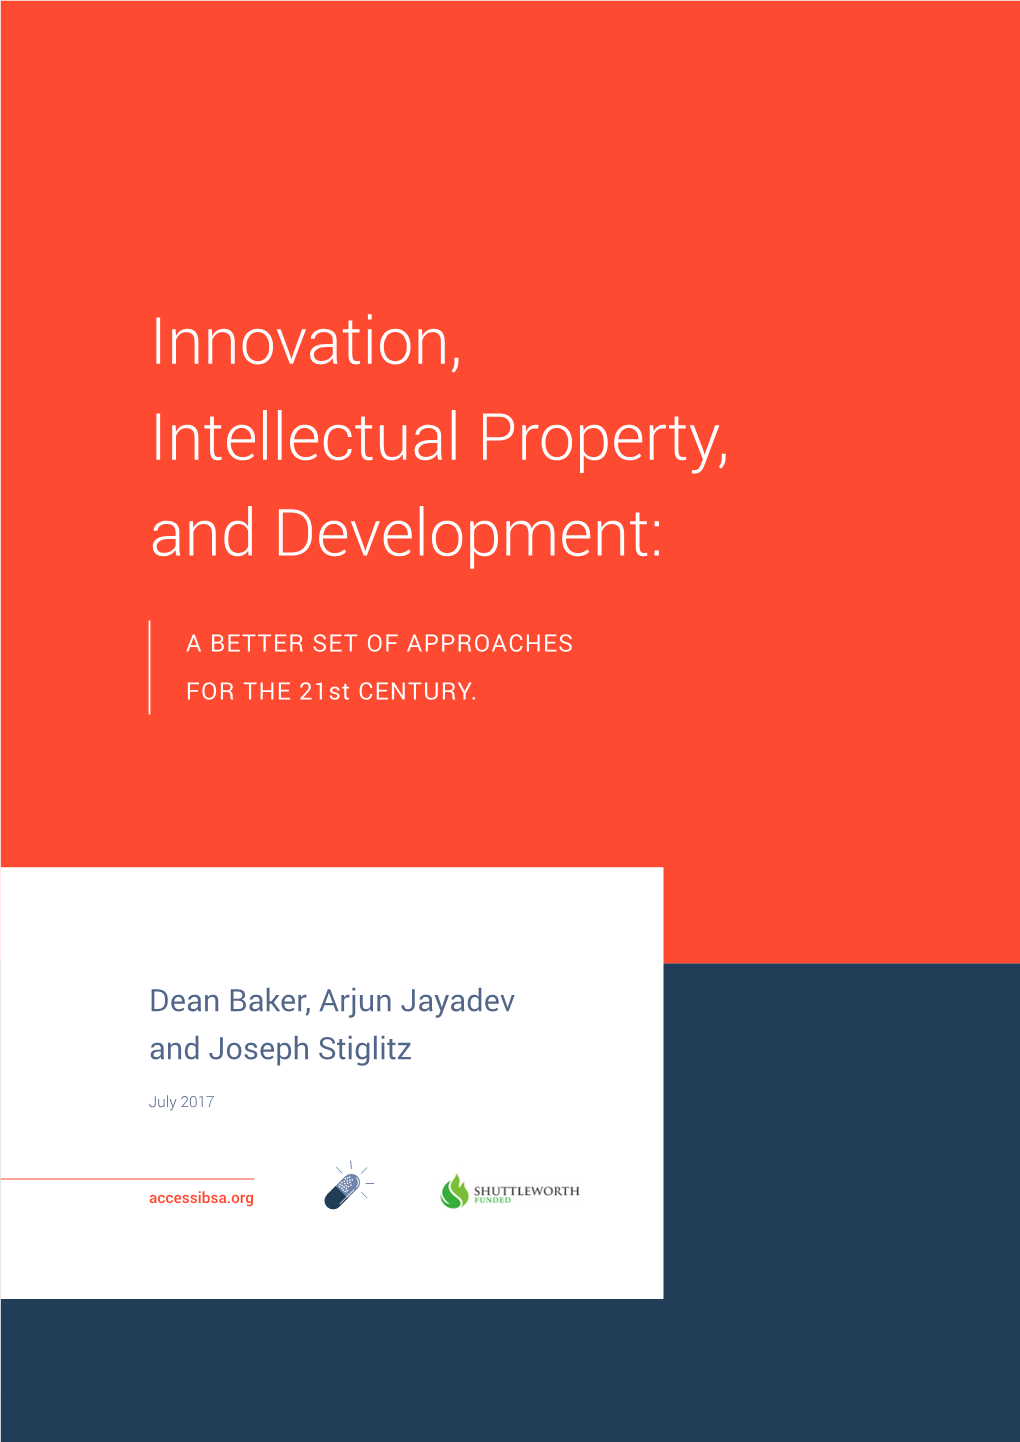 Innovation, Intellectual Property, and Development